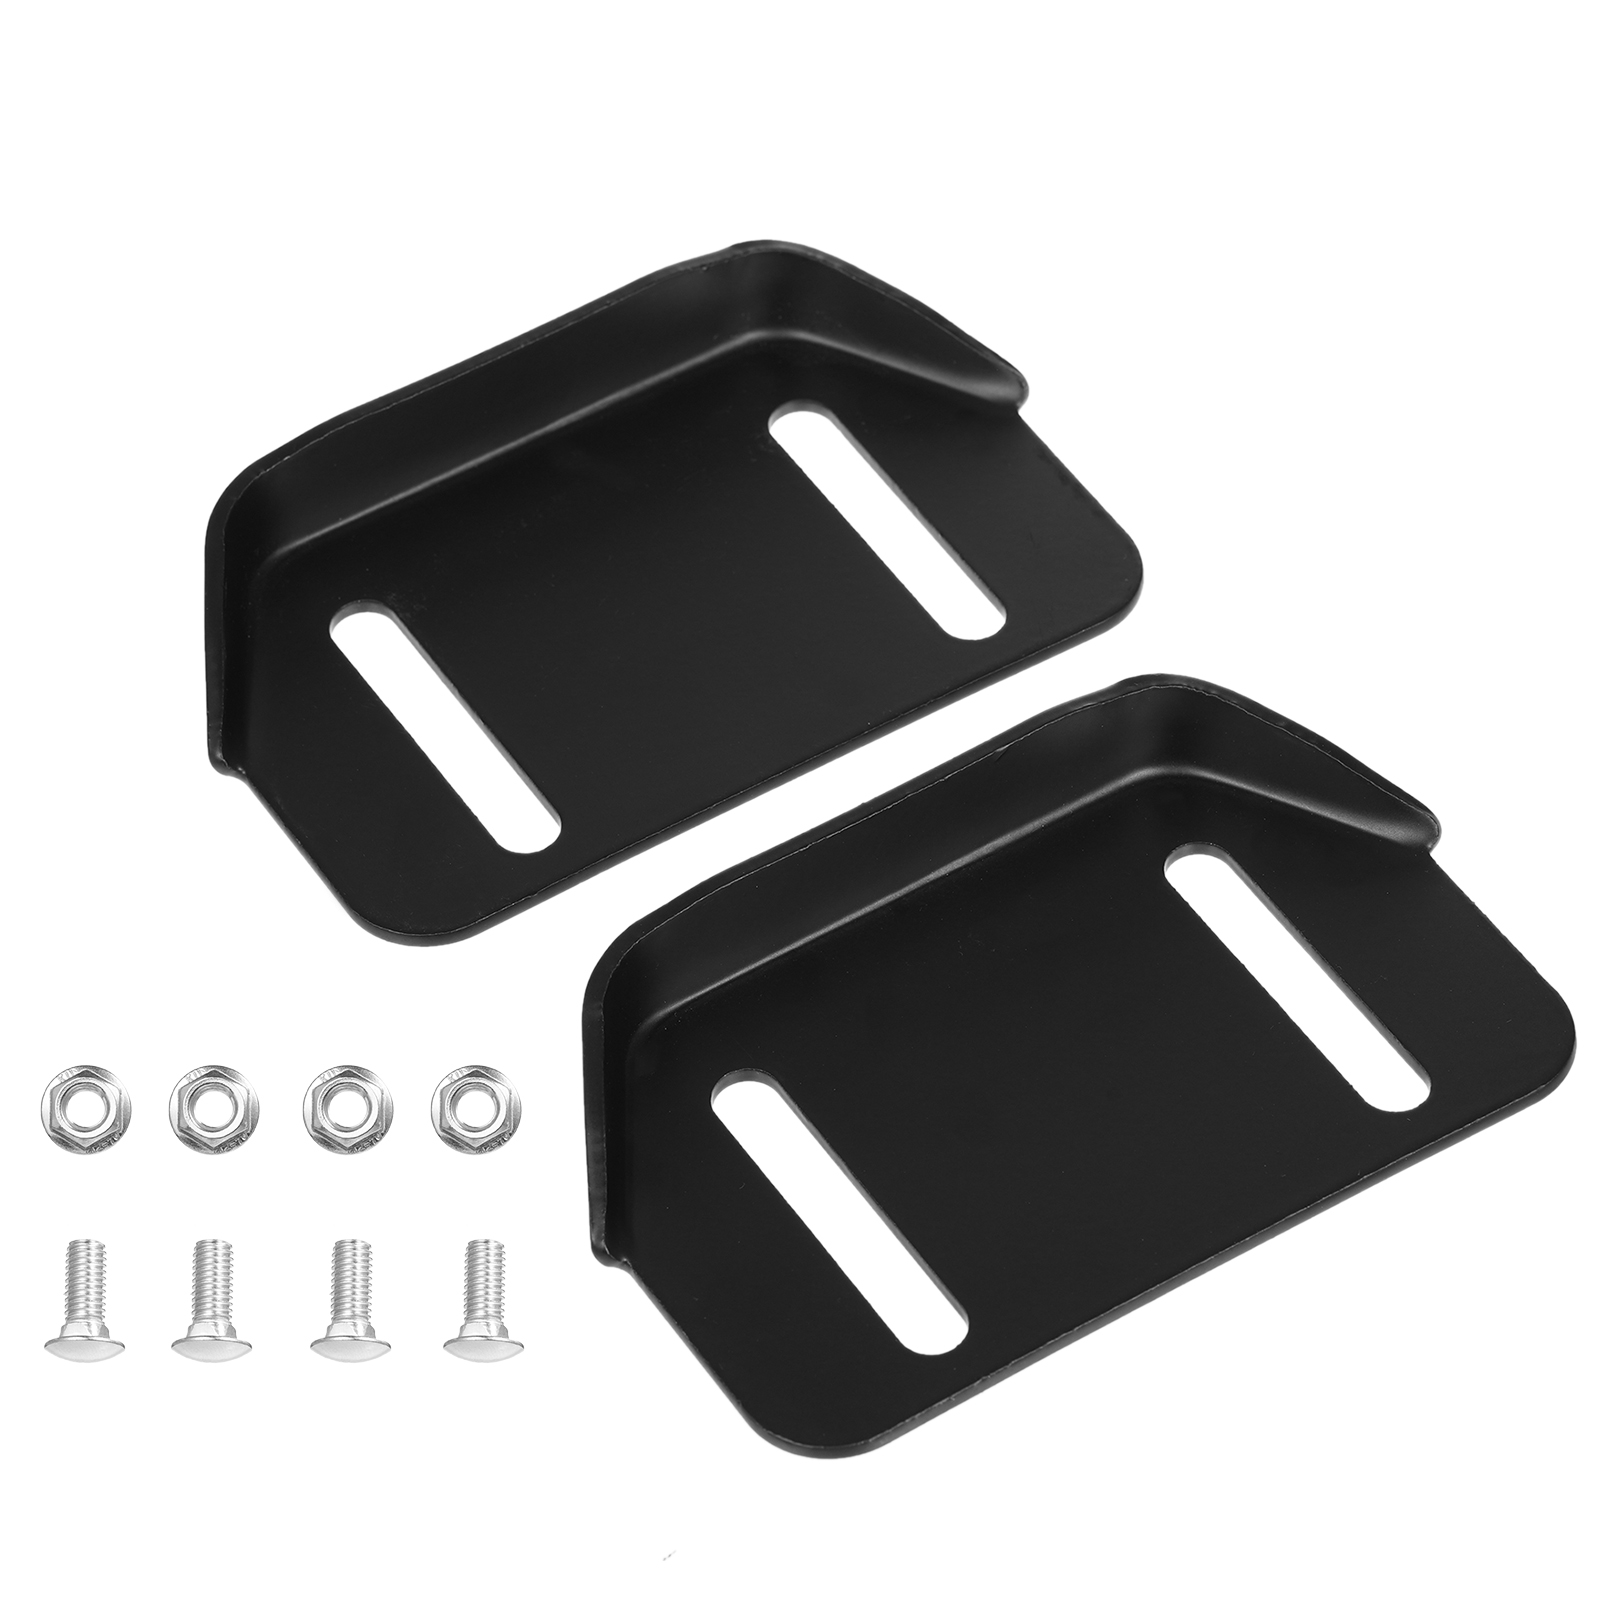 784-5580 Snow Thrower Slide Shoes 2 Pack Skid Shoes with Mounting Hardware for MTD 784-5580-0637 Fits for Cub Cadet Yardman Snow Blower